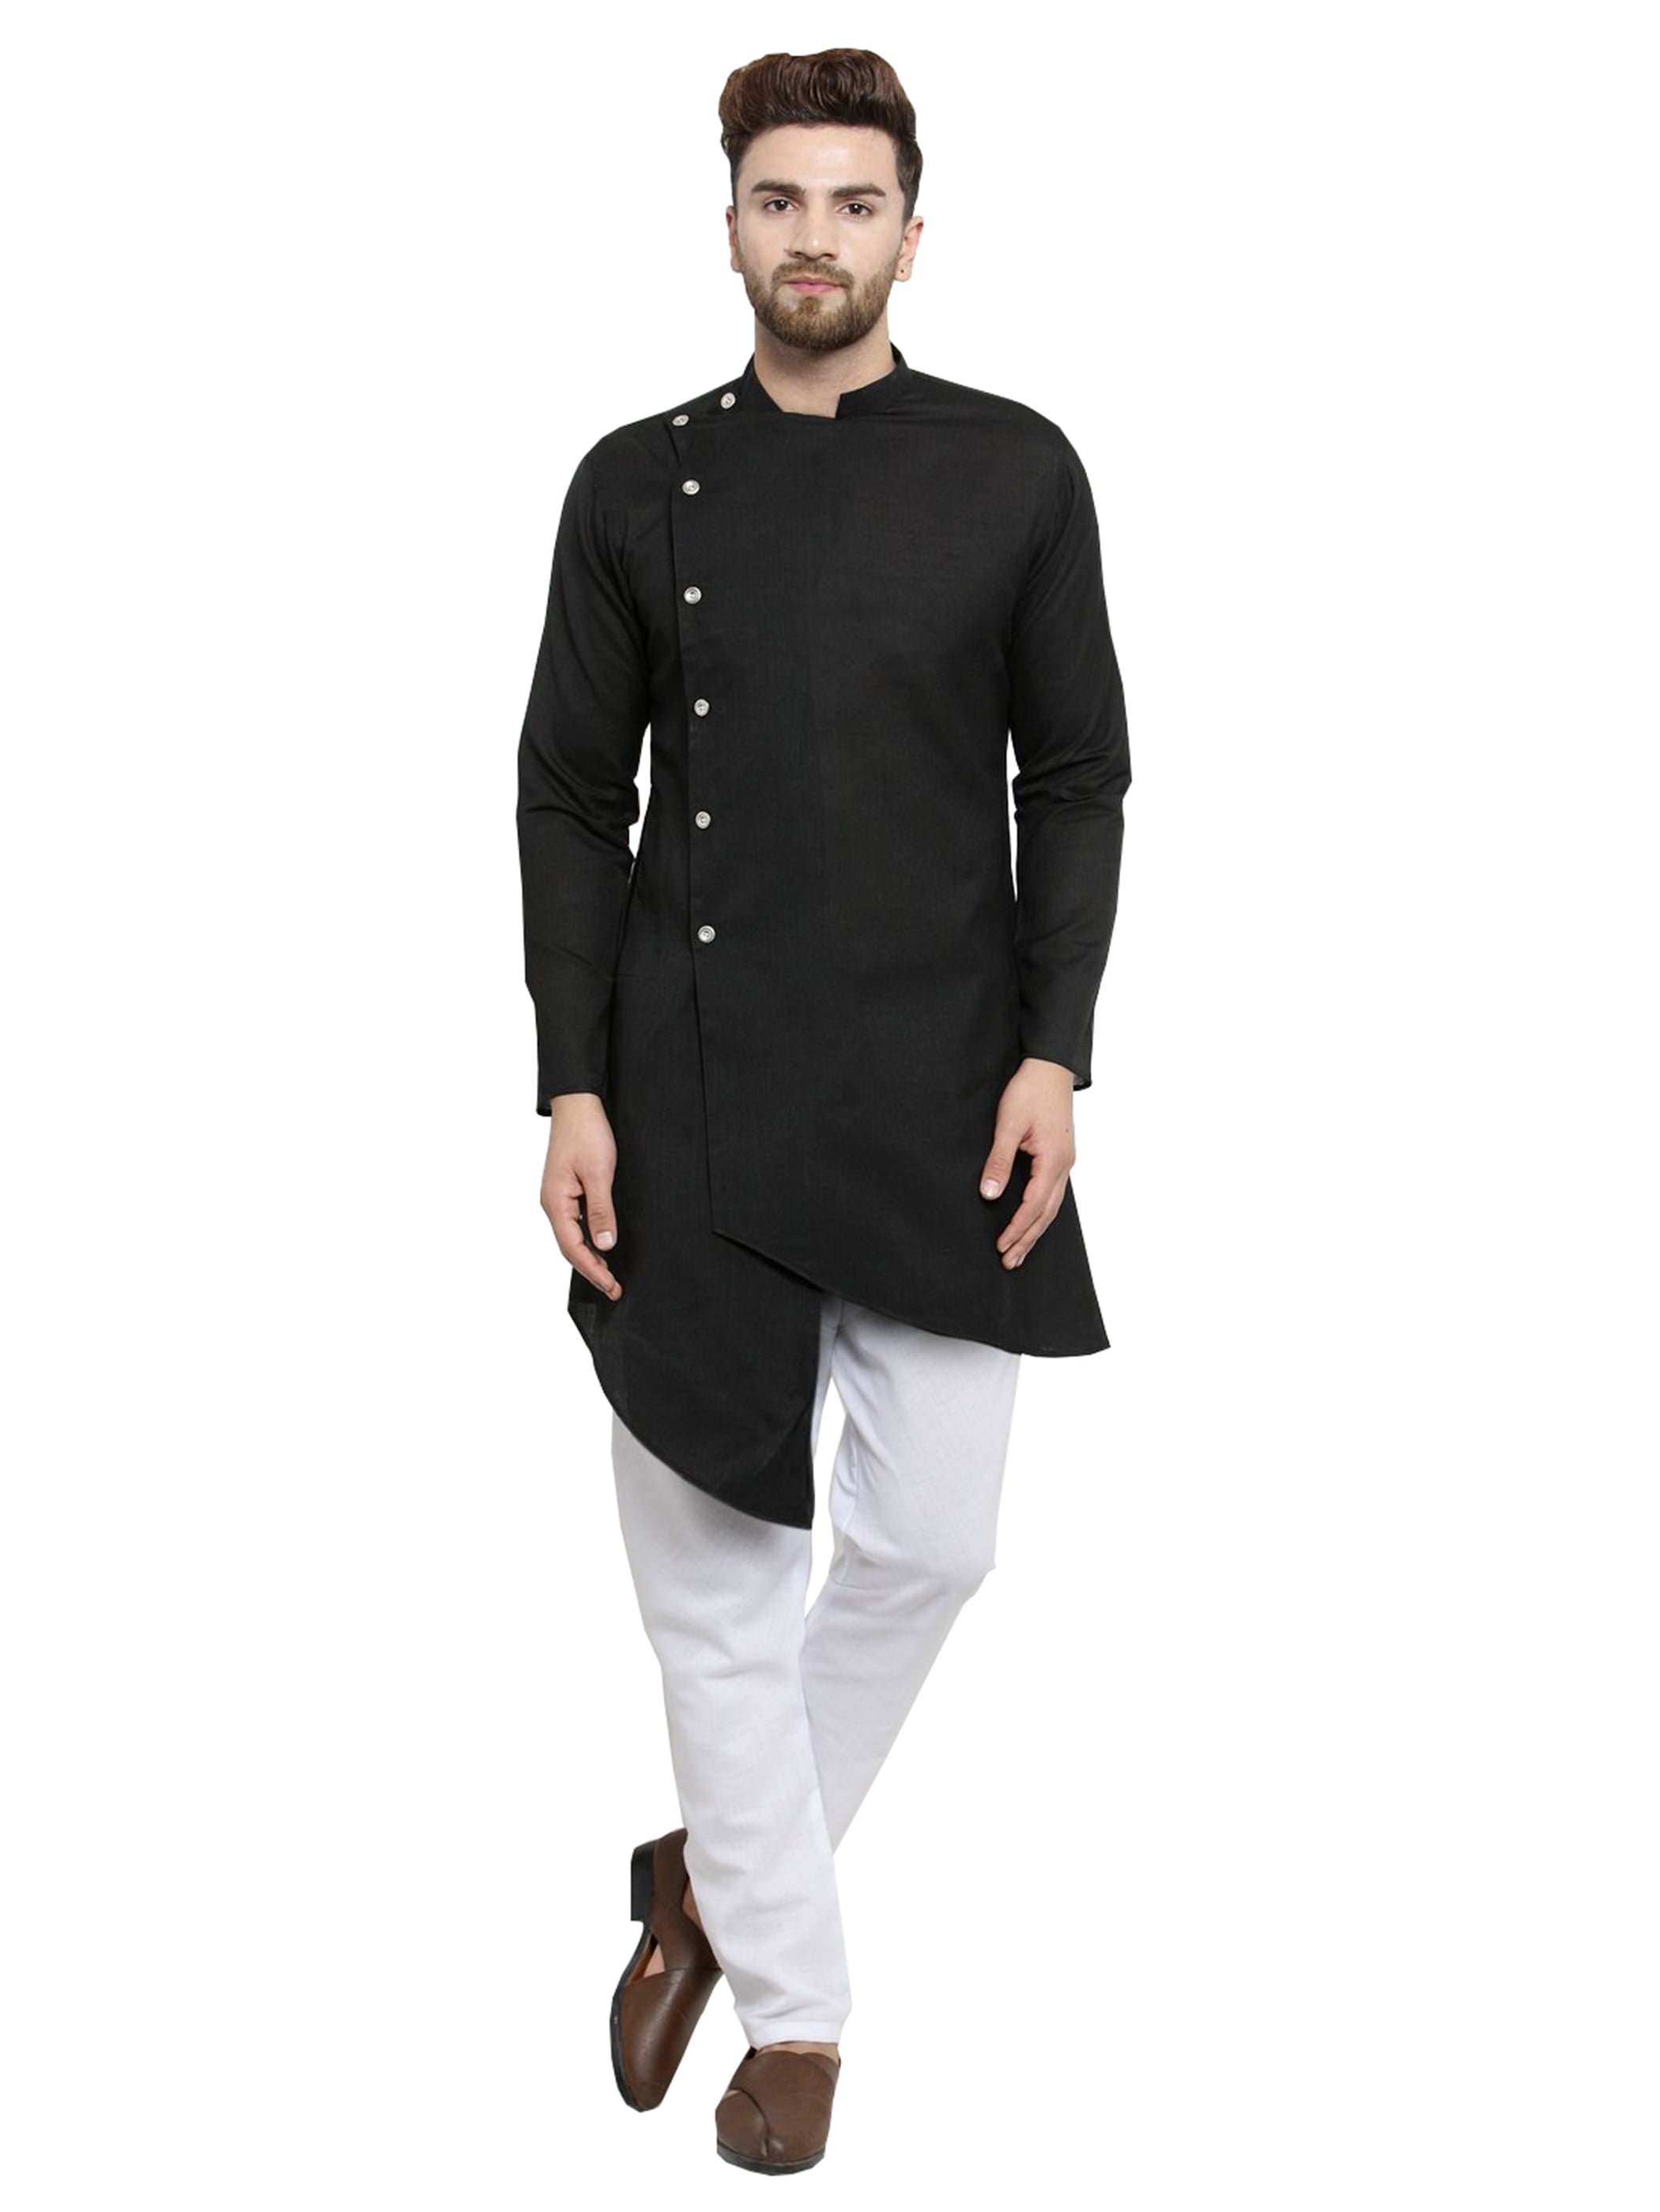 In-Sattva Mens Traditional Indian Style Pure Cotton Solid Churidaar Pants